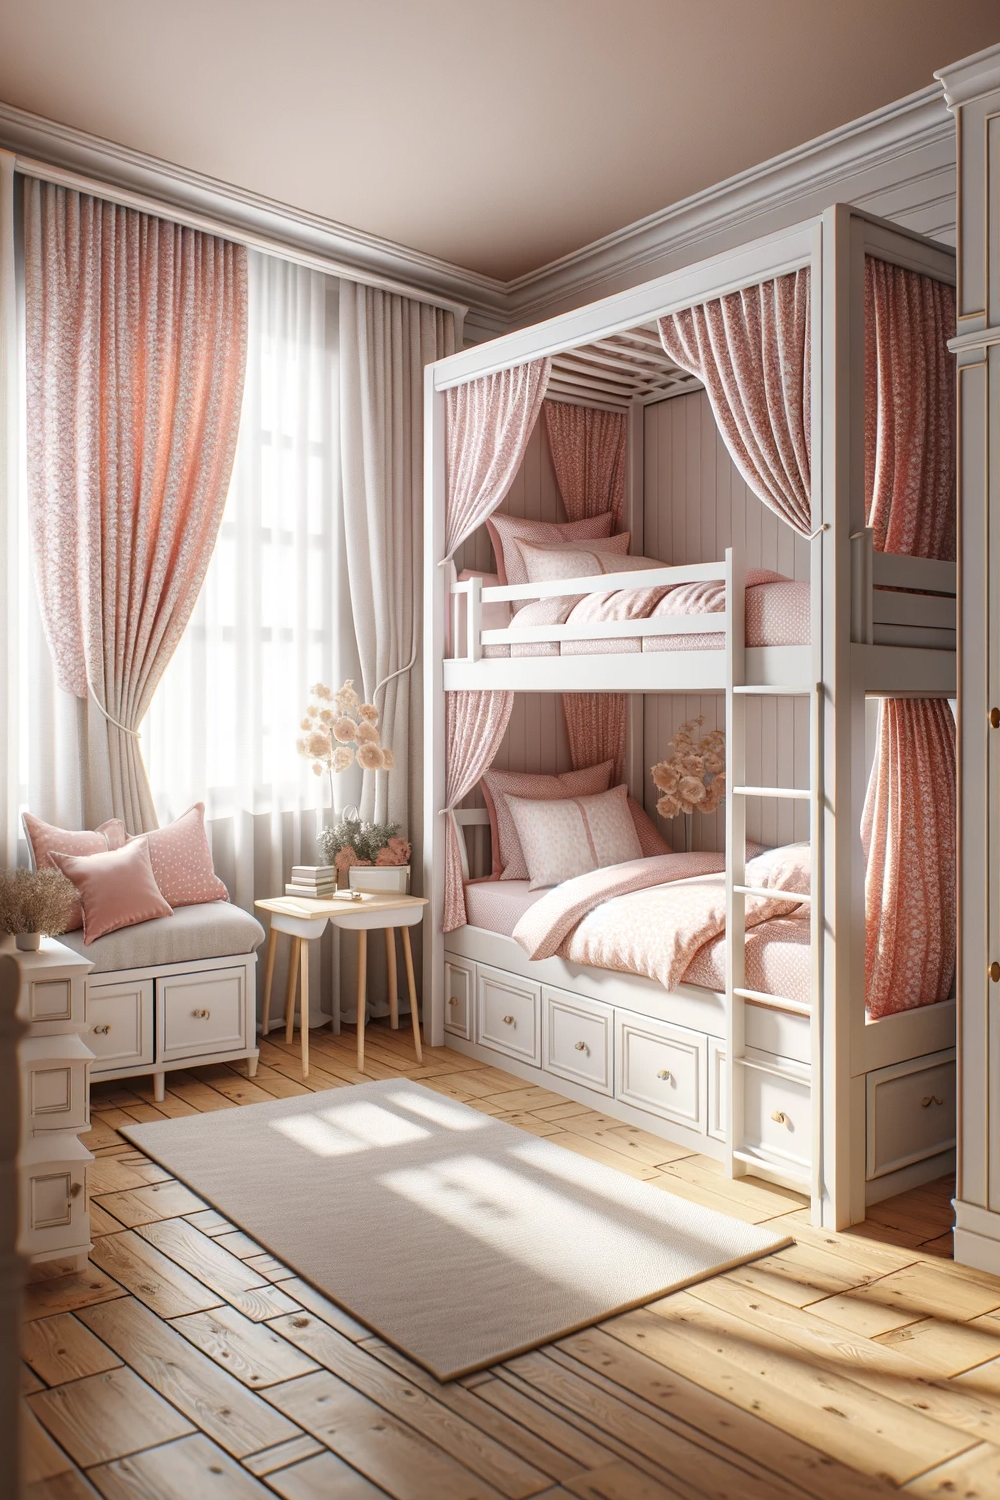 Bunk-Bed-with-floral Patterned-Curtains.